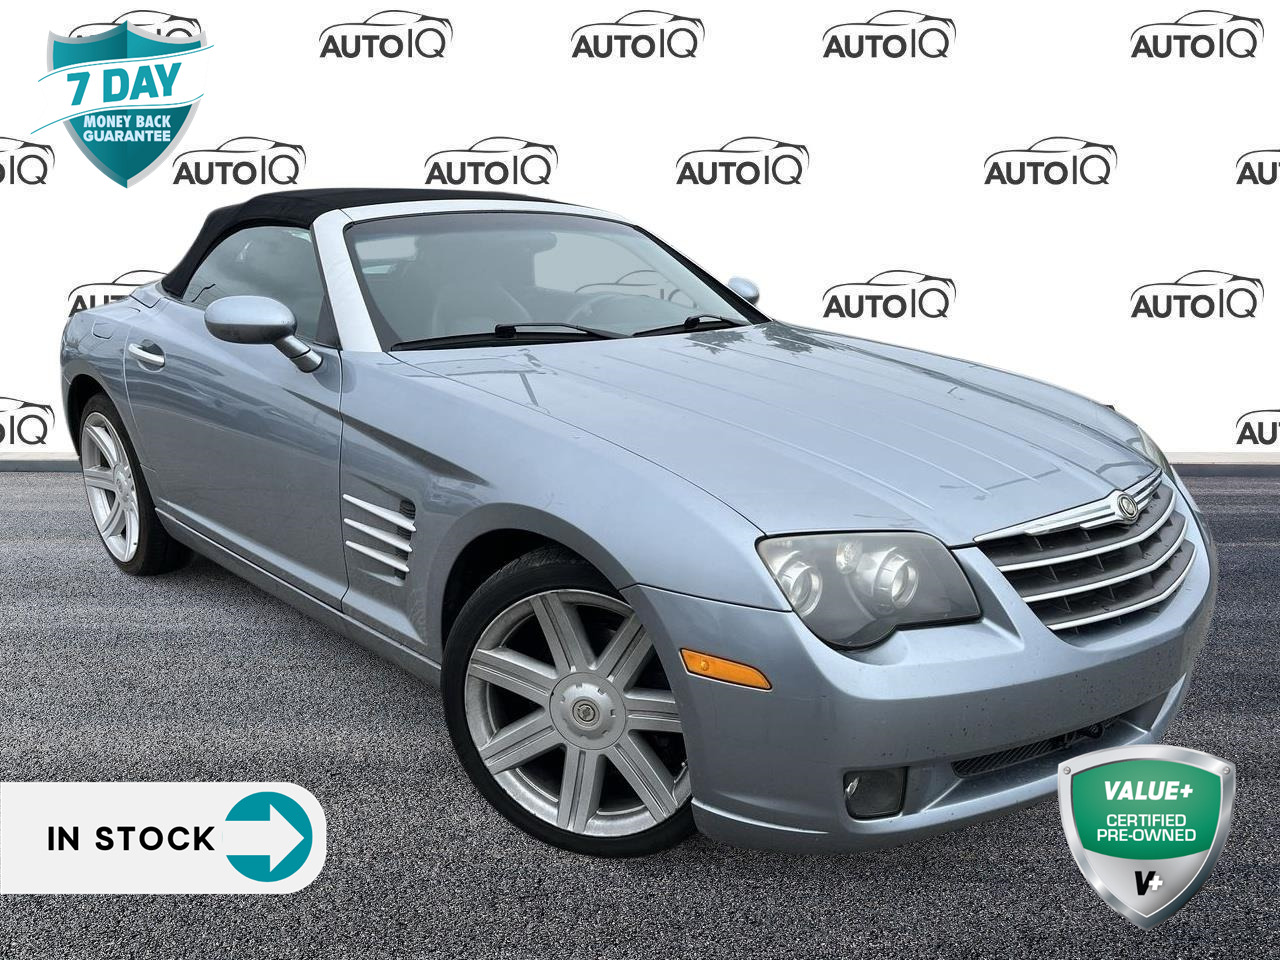 2005 Chrysler Crossfire Limited Limited | Convertible | Low Kms!!